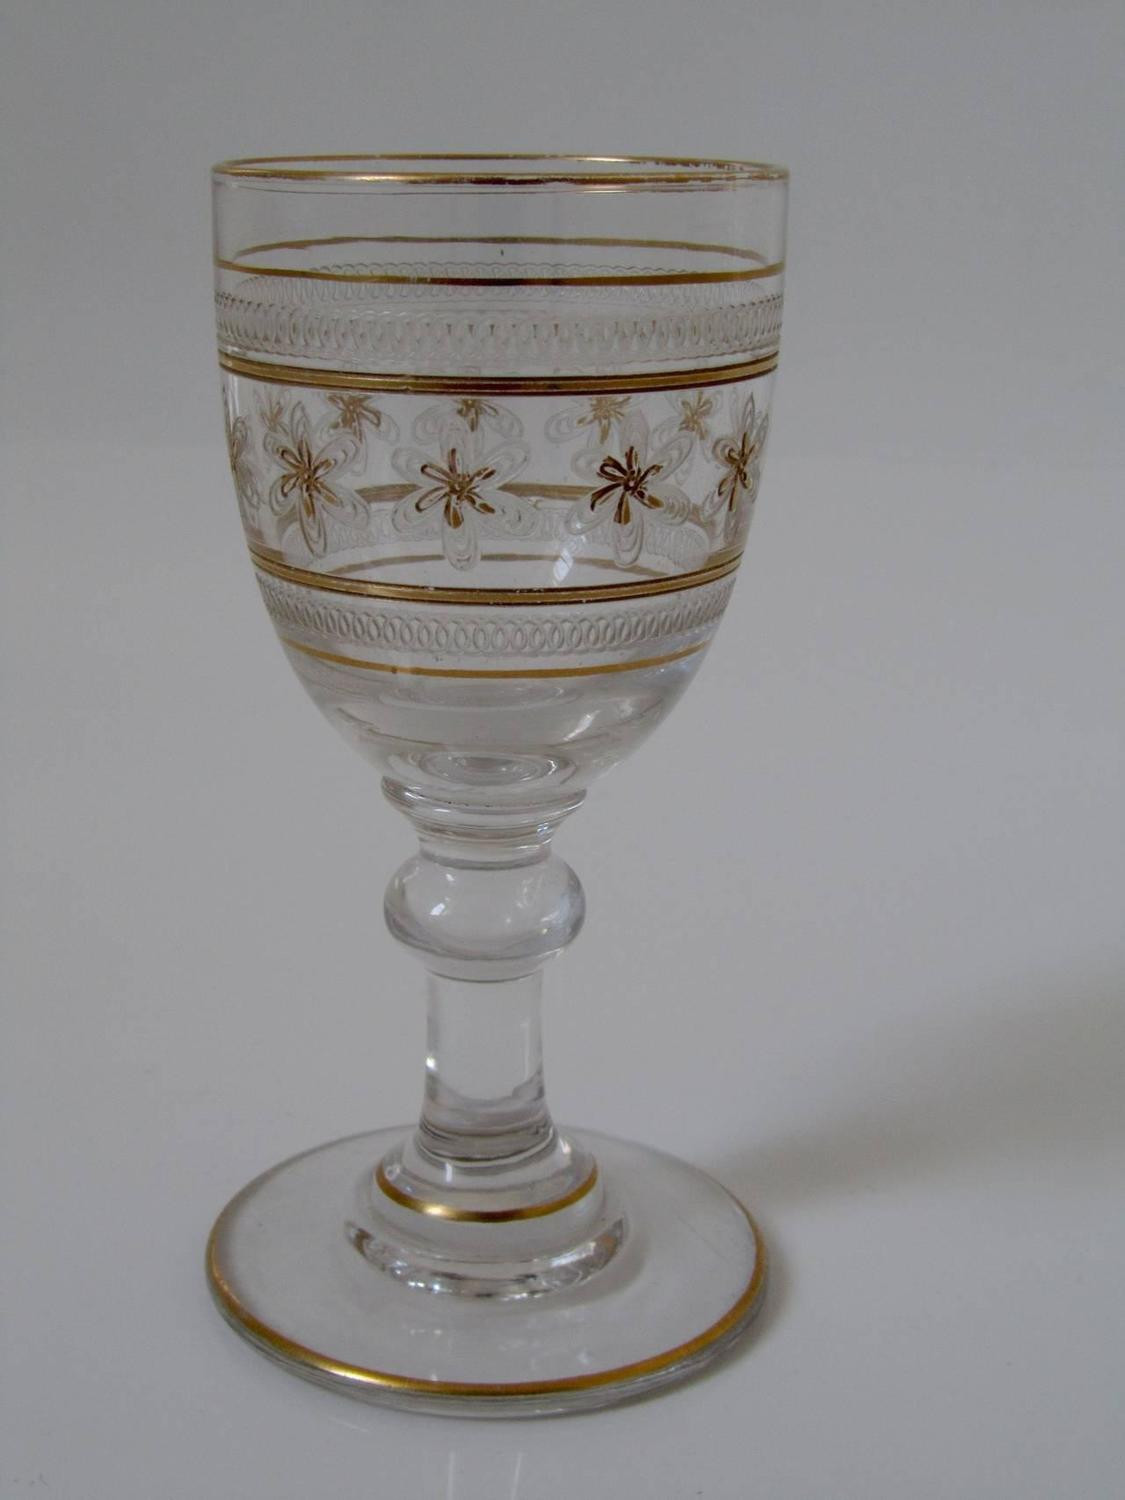 29 Cute Waterford Vase Patterns 2024 free download waterford vase patterns of saint louis antique french crystal gilded liquor or aperitif serving pertaining to saint louis antique french crystal gilded liquor or aperitif serving set at 1std